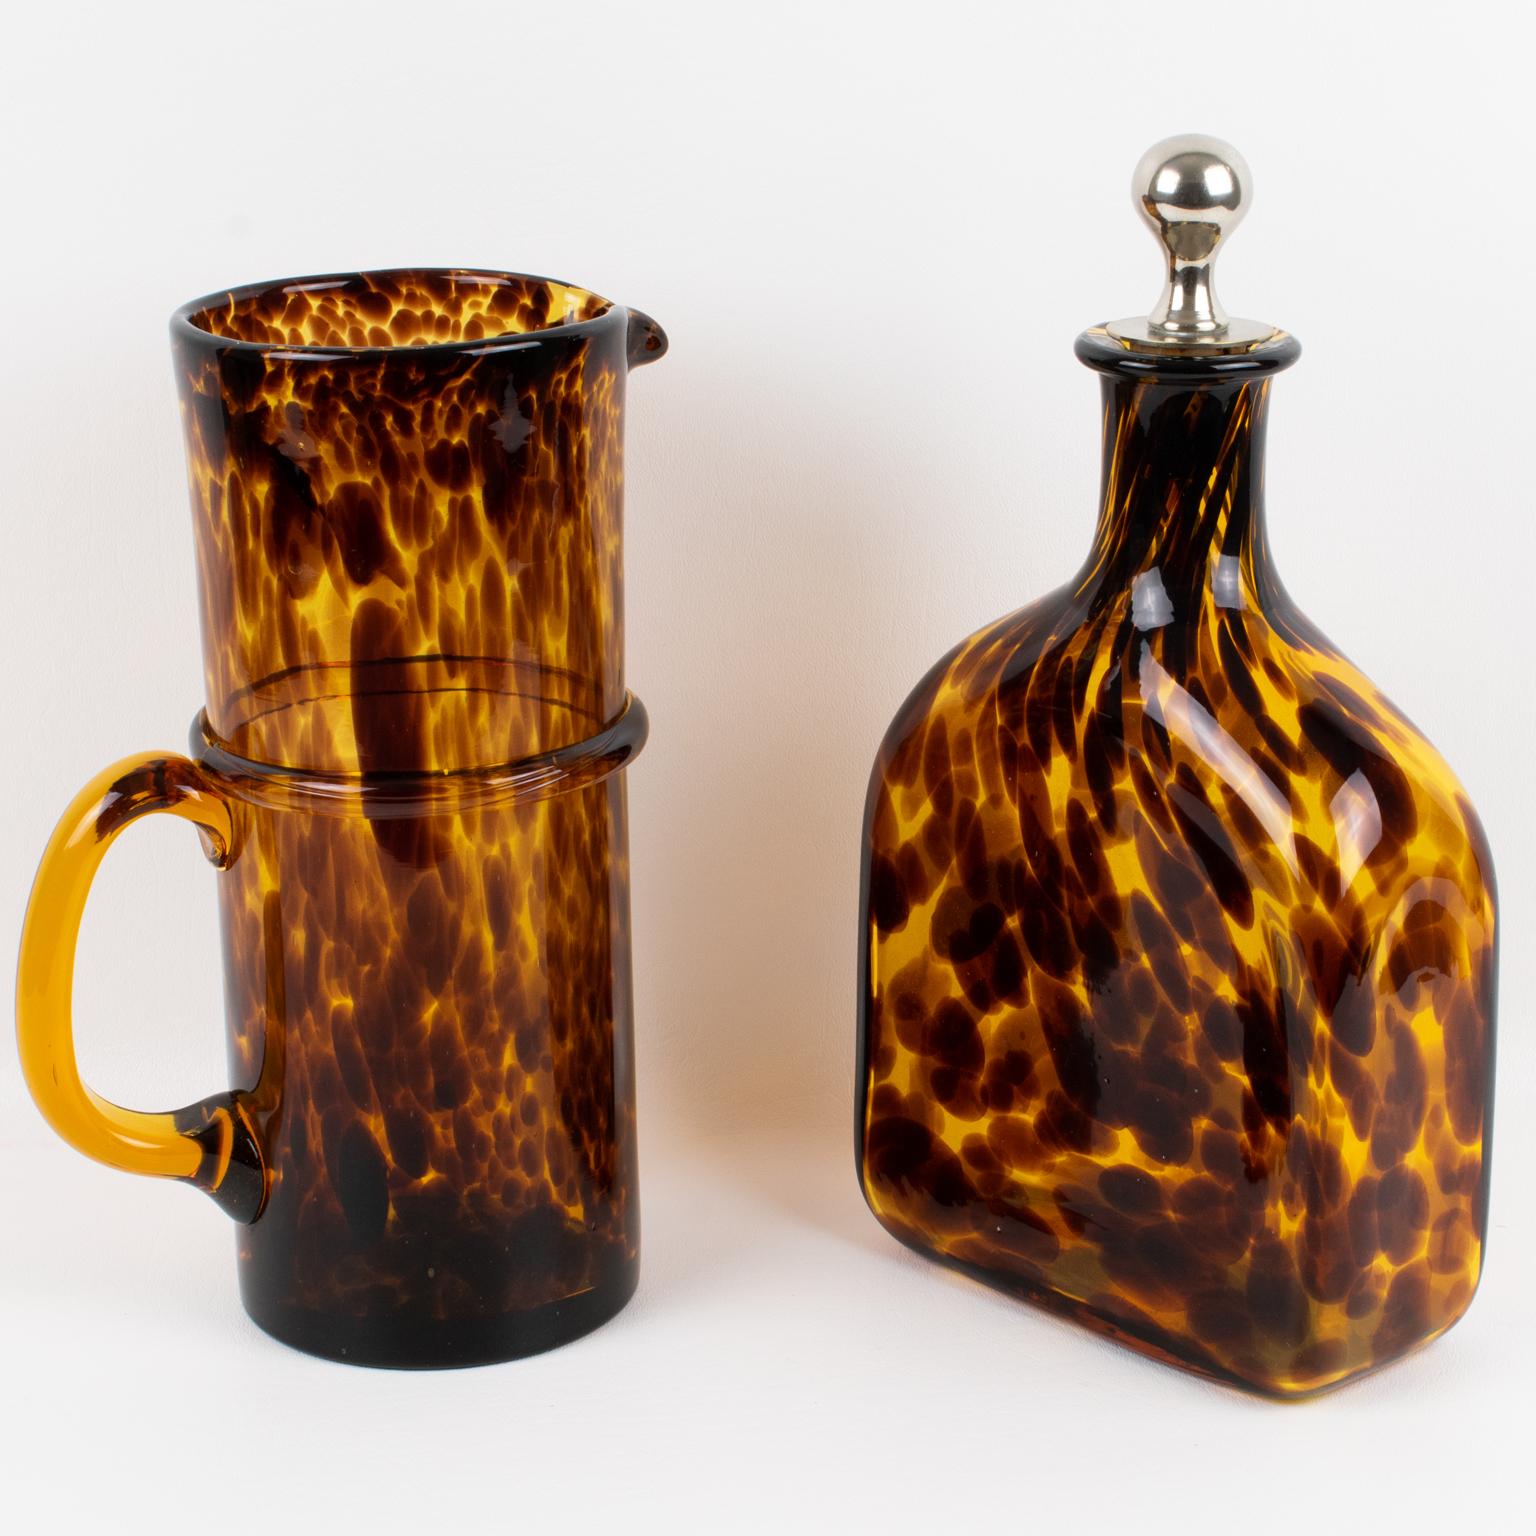 Christian Dior Home Tortoiseshell Glass Barware Set Pitcher and Decanter In Good Condition For Sale In Atlanta, GA